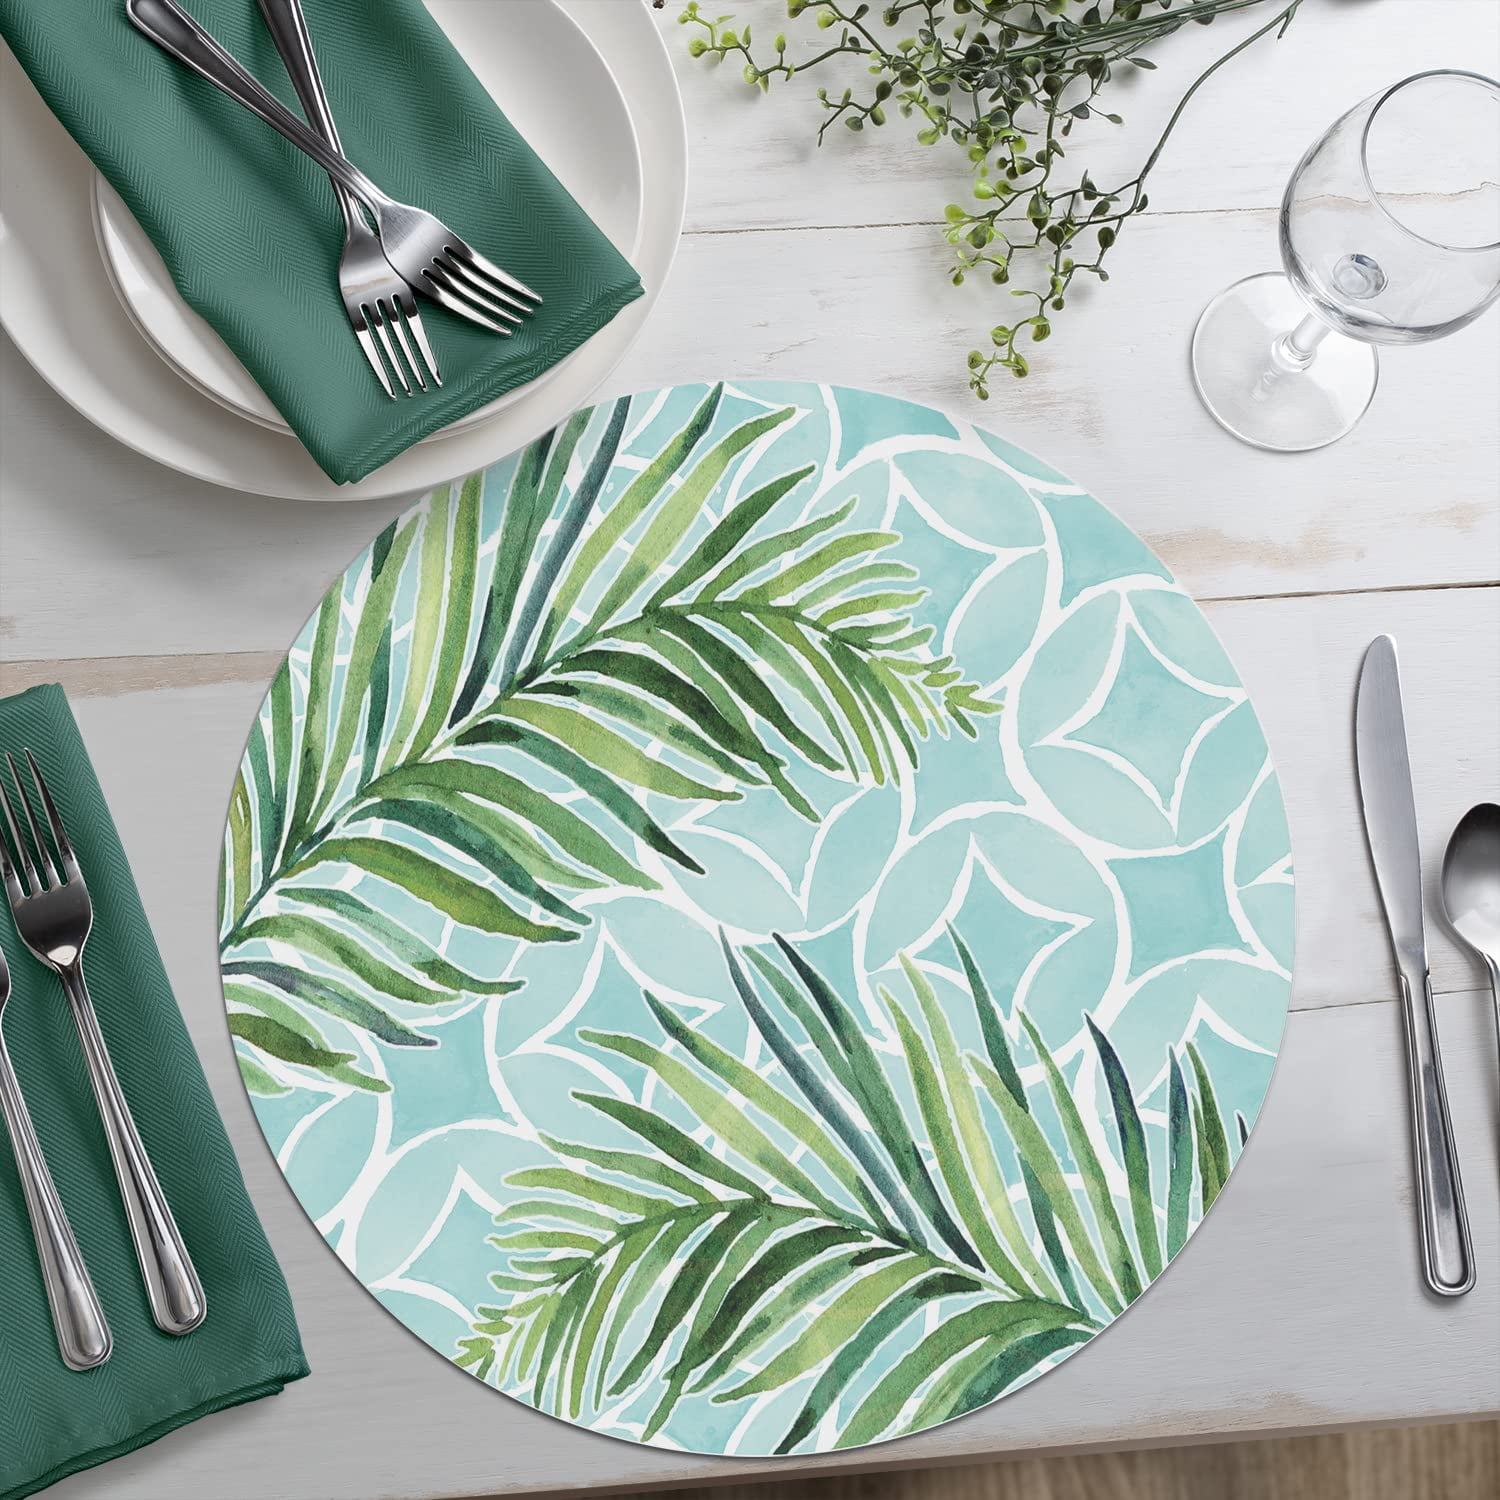 Pastel green color clear Placemat by PalitraArt